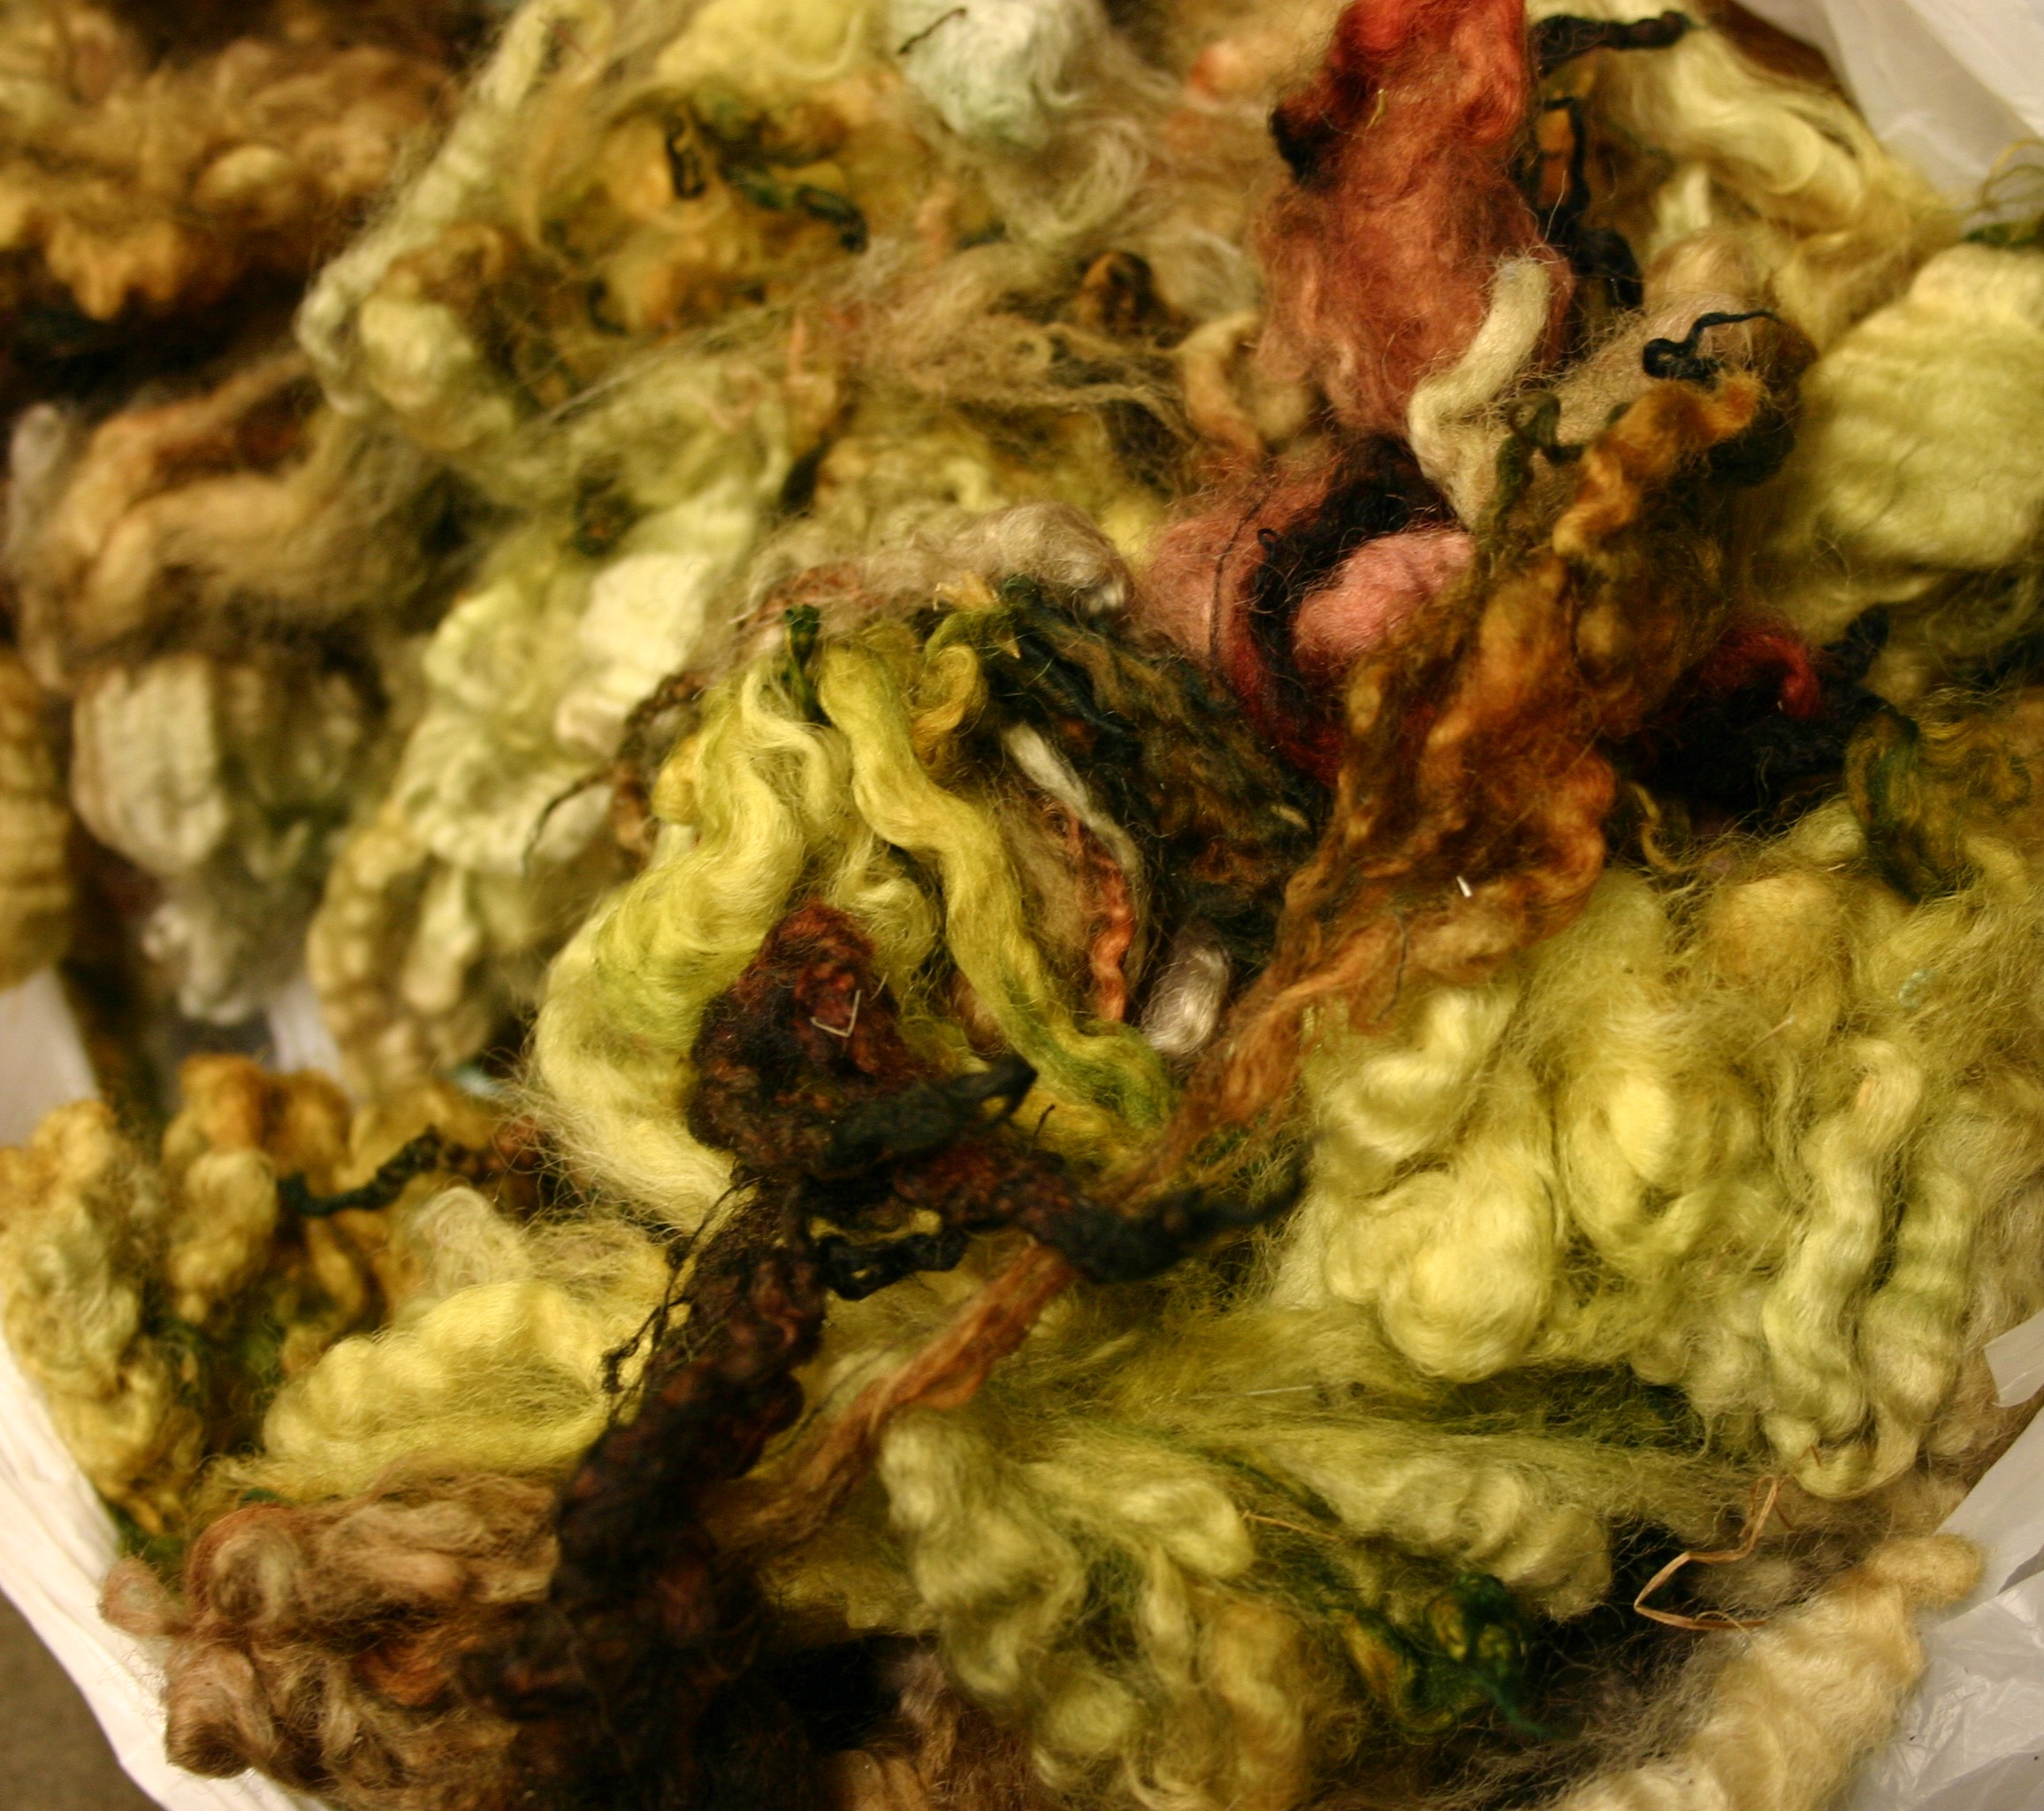 Wensleydale Blends Domestic Wool - 1 oz - Hand-Dyed in Sun through the Trees